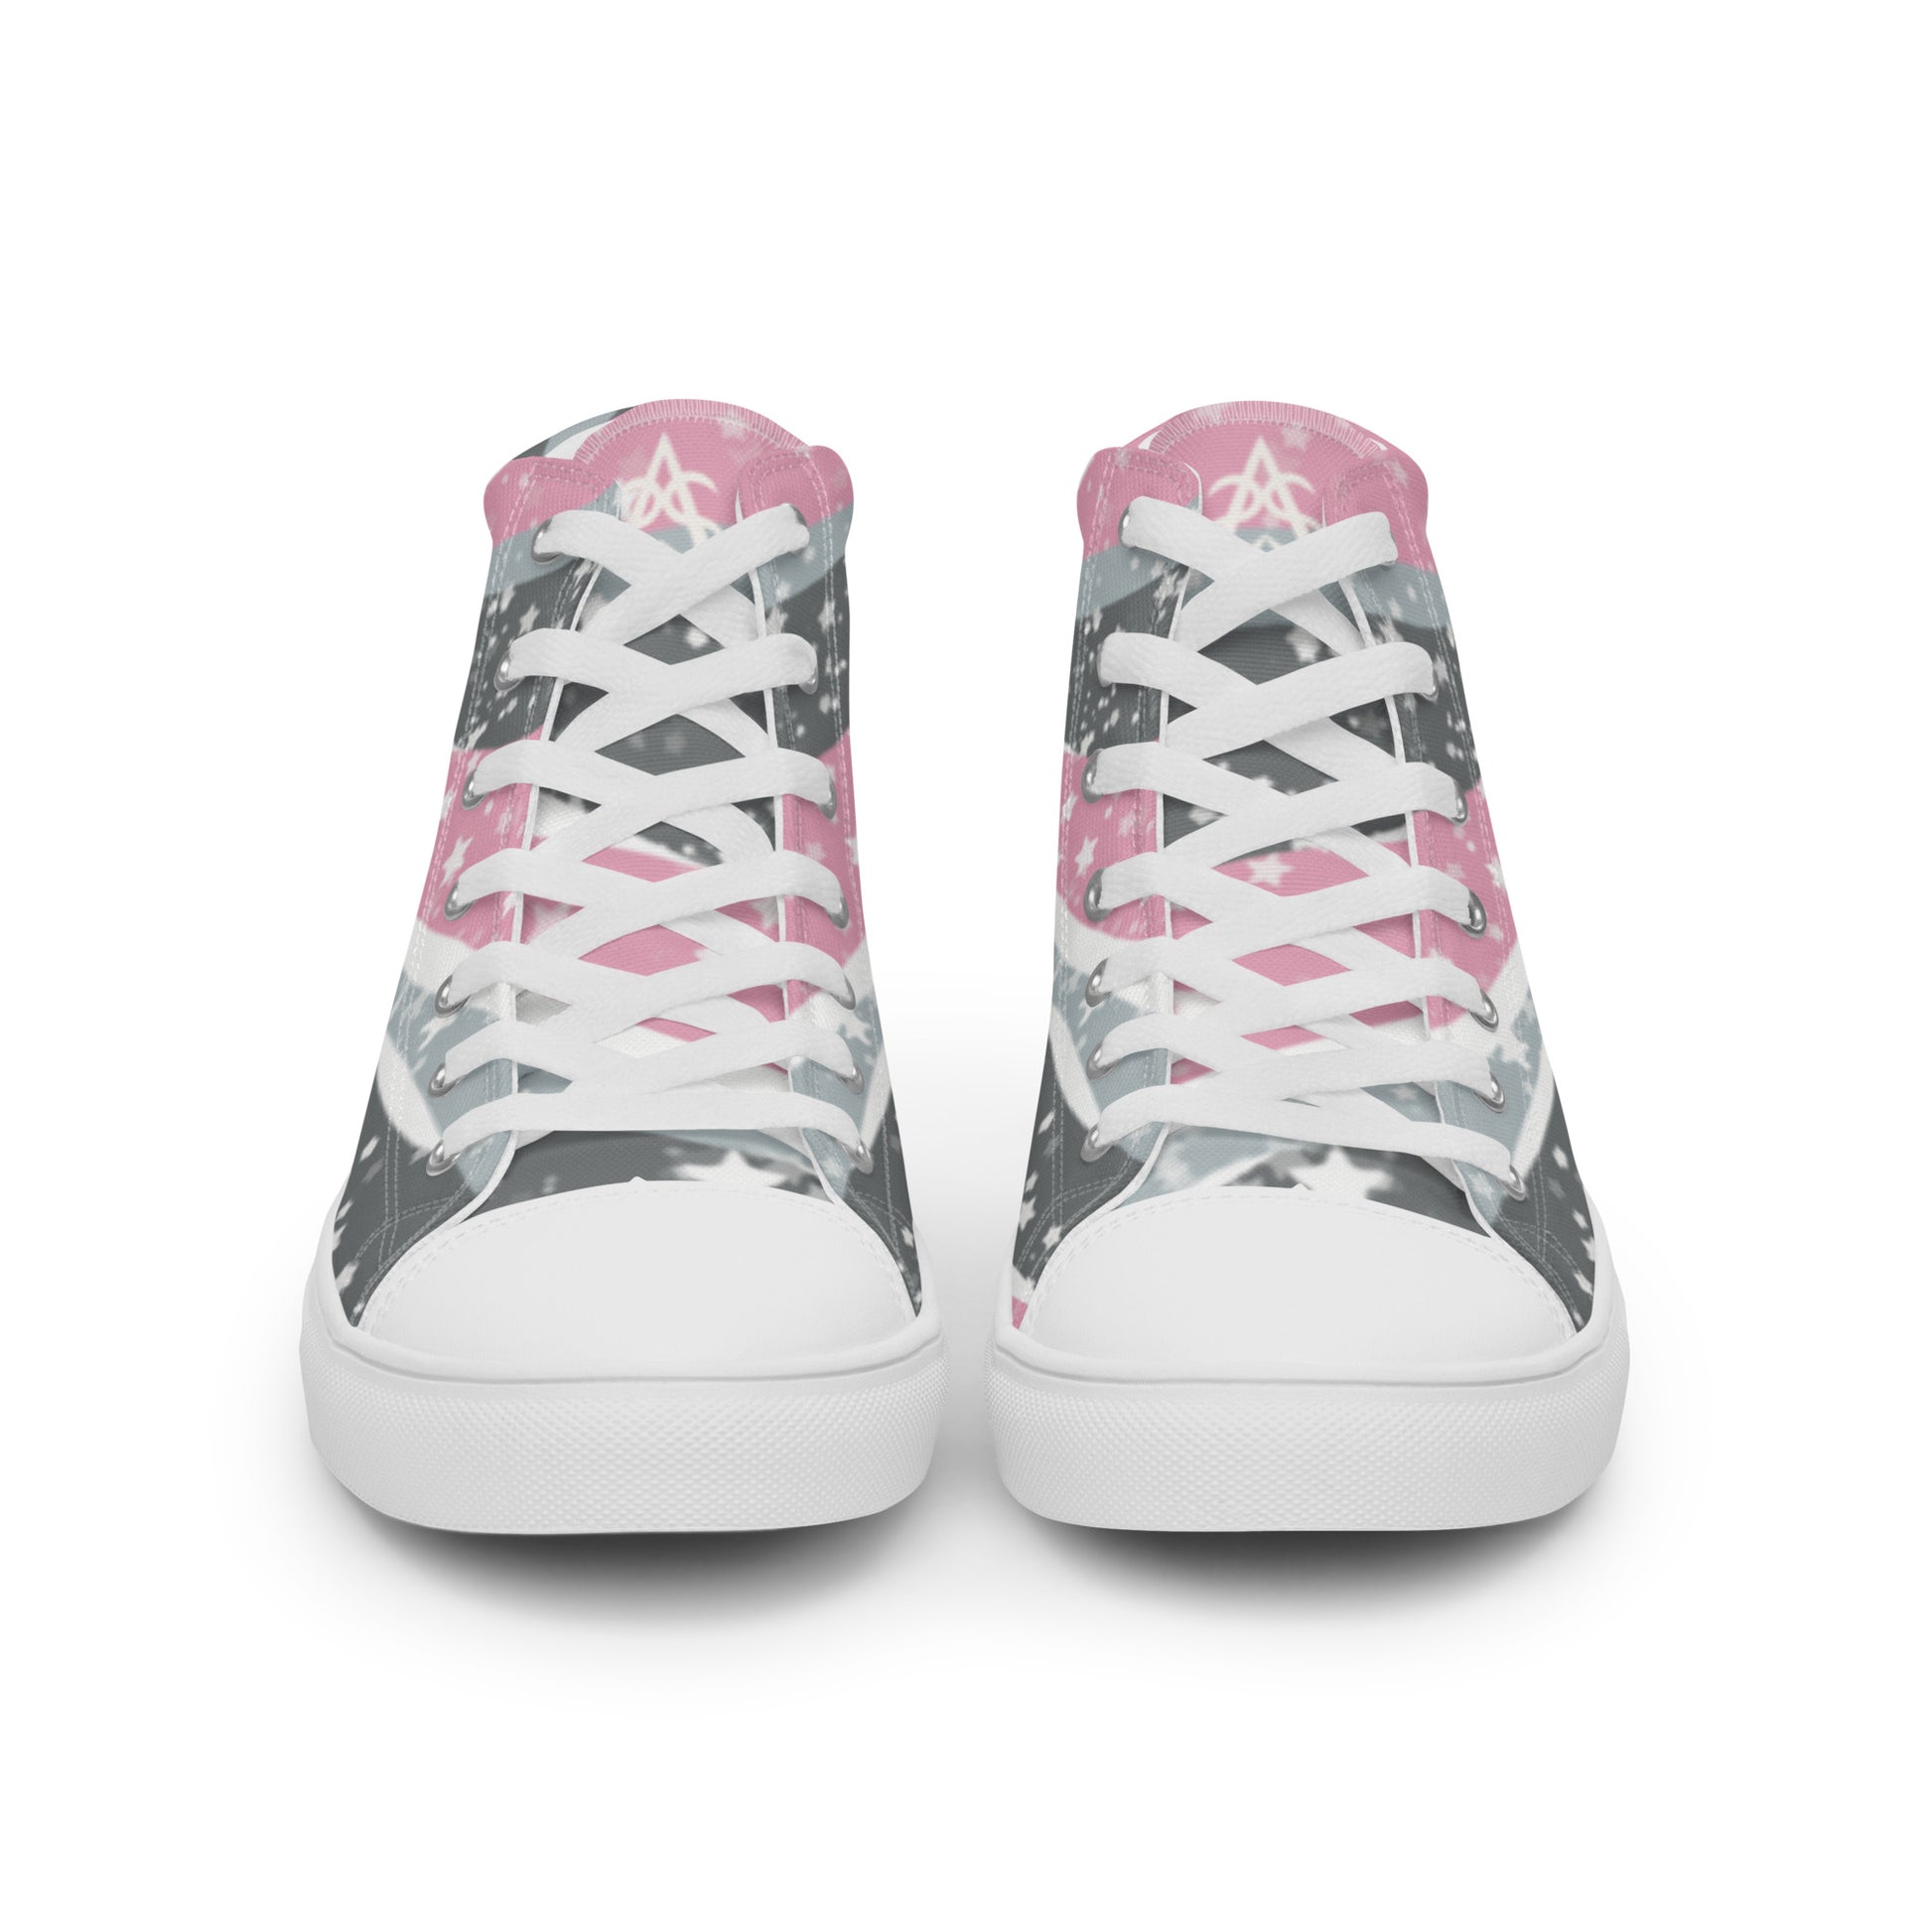 Front view: A pair of high top shoes with ribbons of the demigirl flag colors and stars coming from the heel and getting larger across the shoe to the laces.